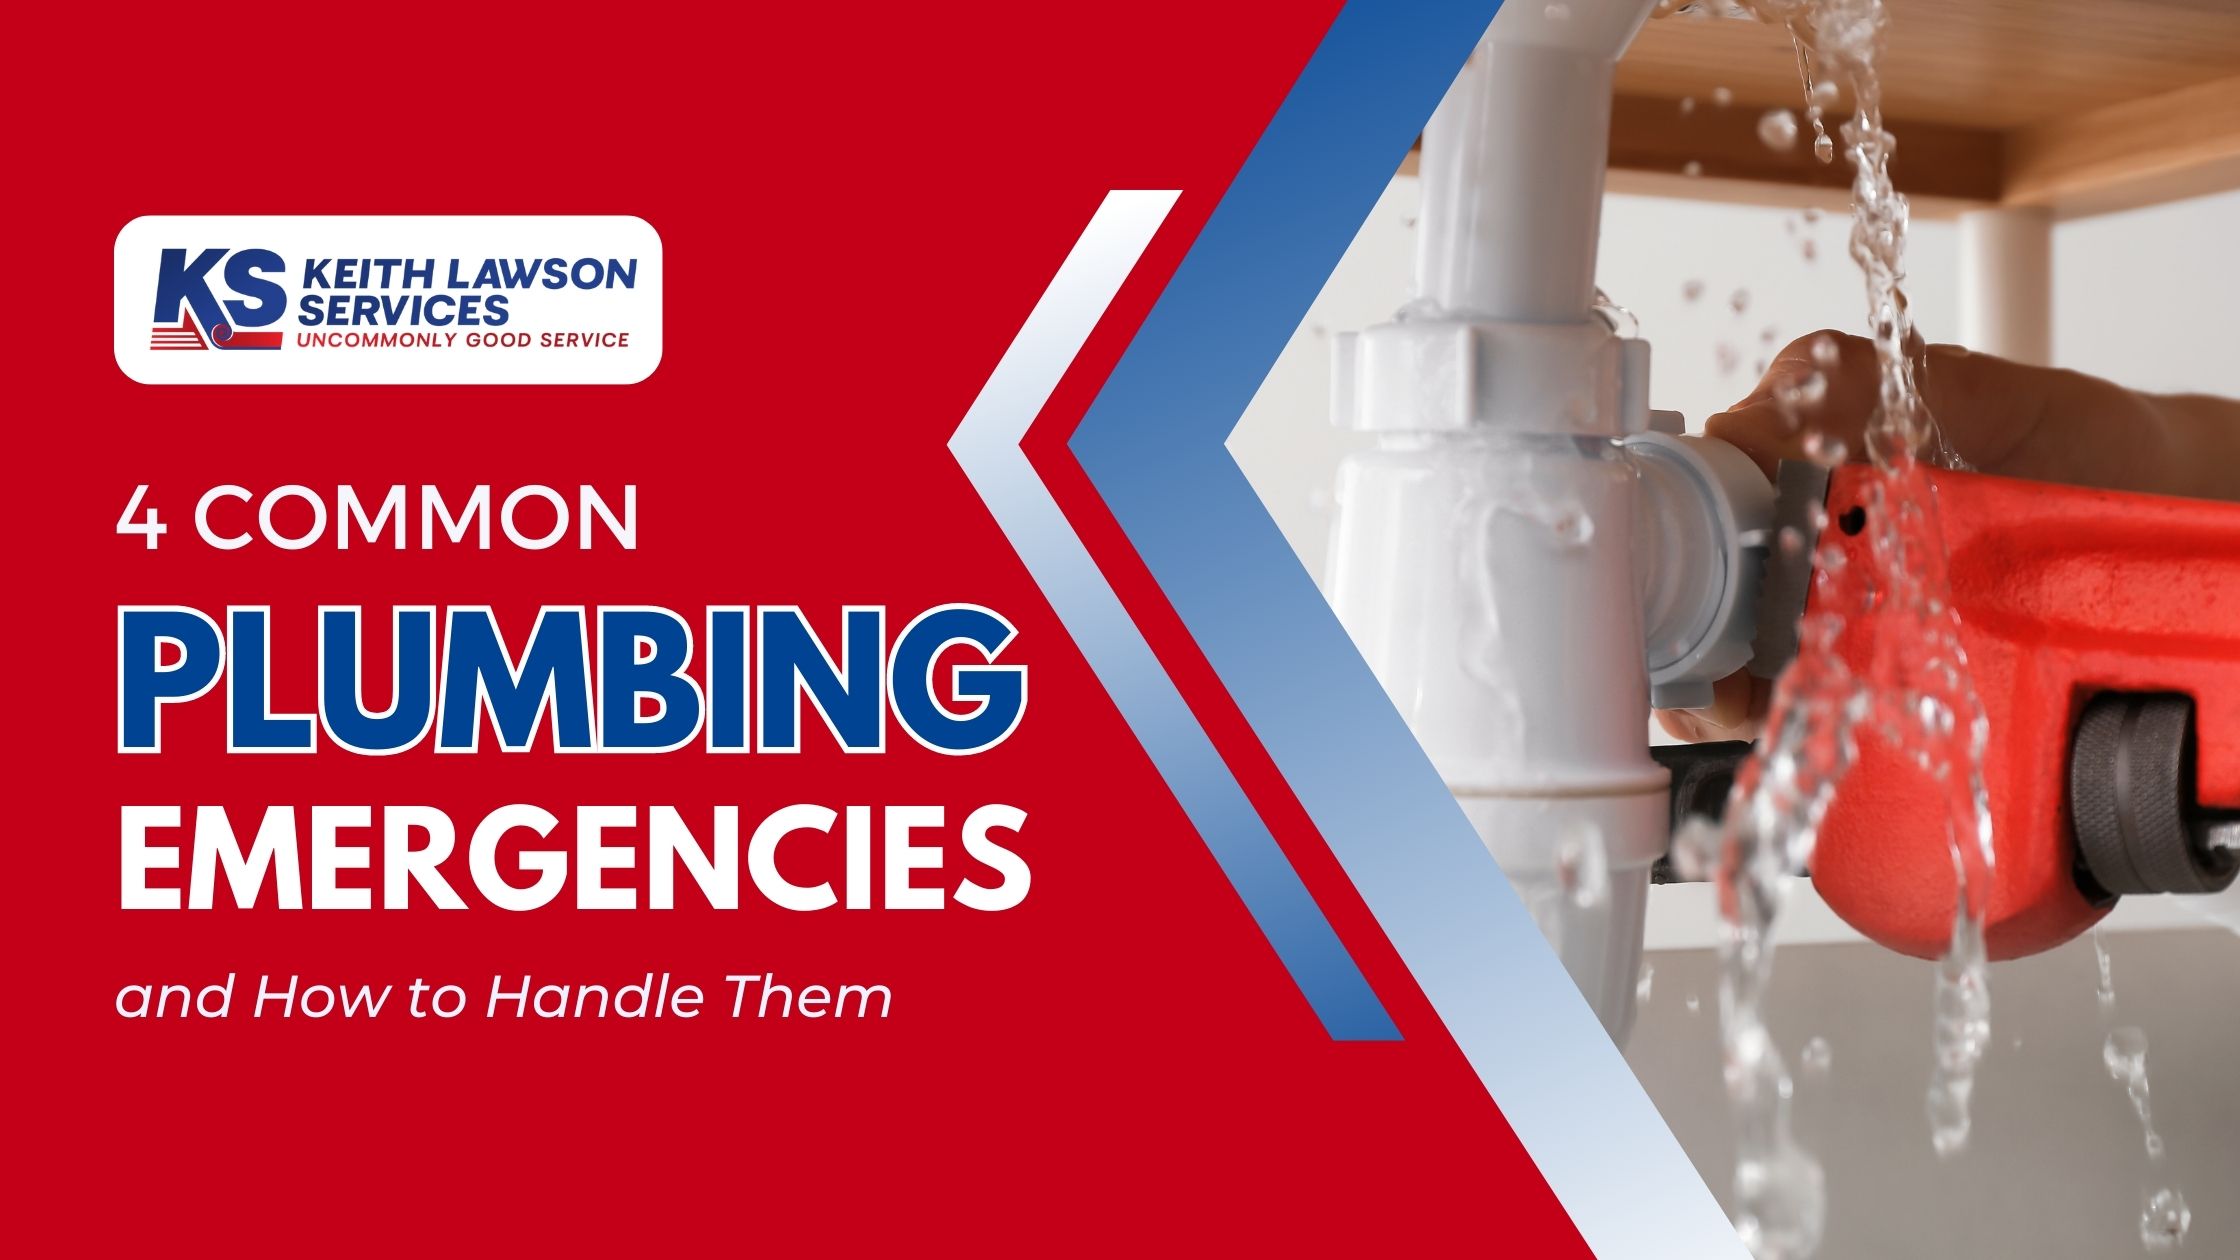 4 Common Plumbing Emergencies and How to Handle Them